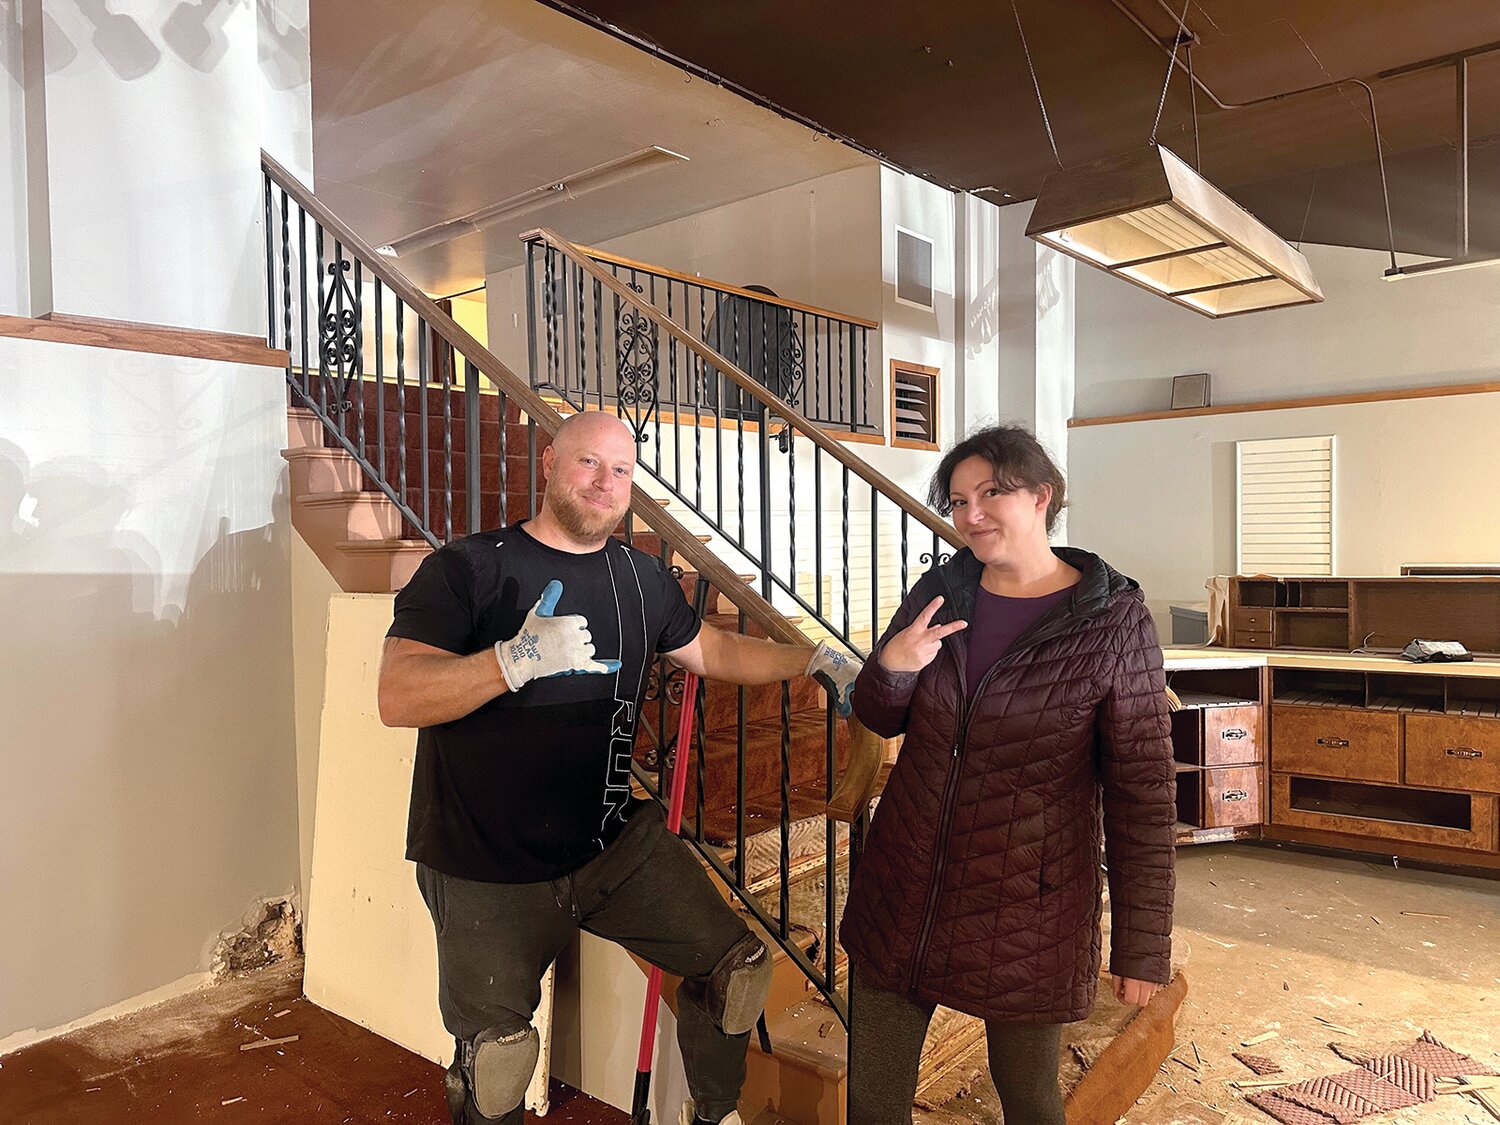 Frank and Danielle Pfannes are converting Bartel’s previous retail space into the Northwest Salmon Smokehouse and Artisan Market. They are pictured here while working on the space last month in downtown Chehalis.